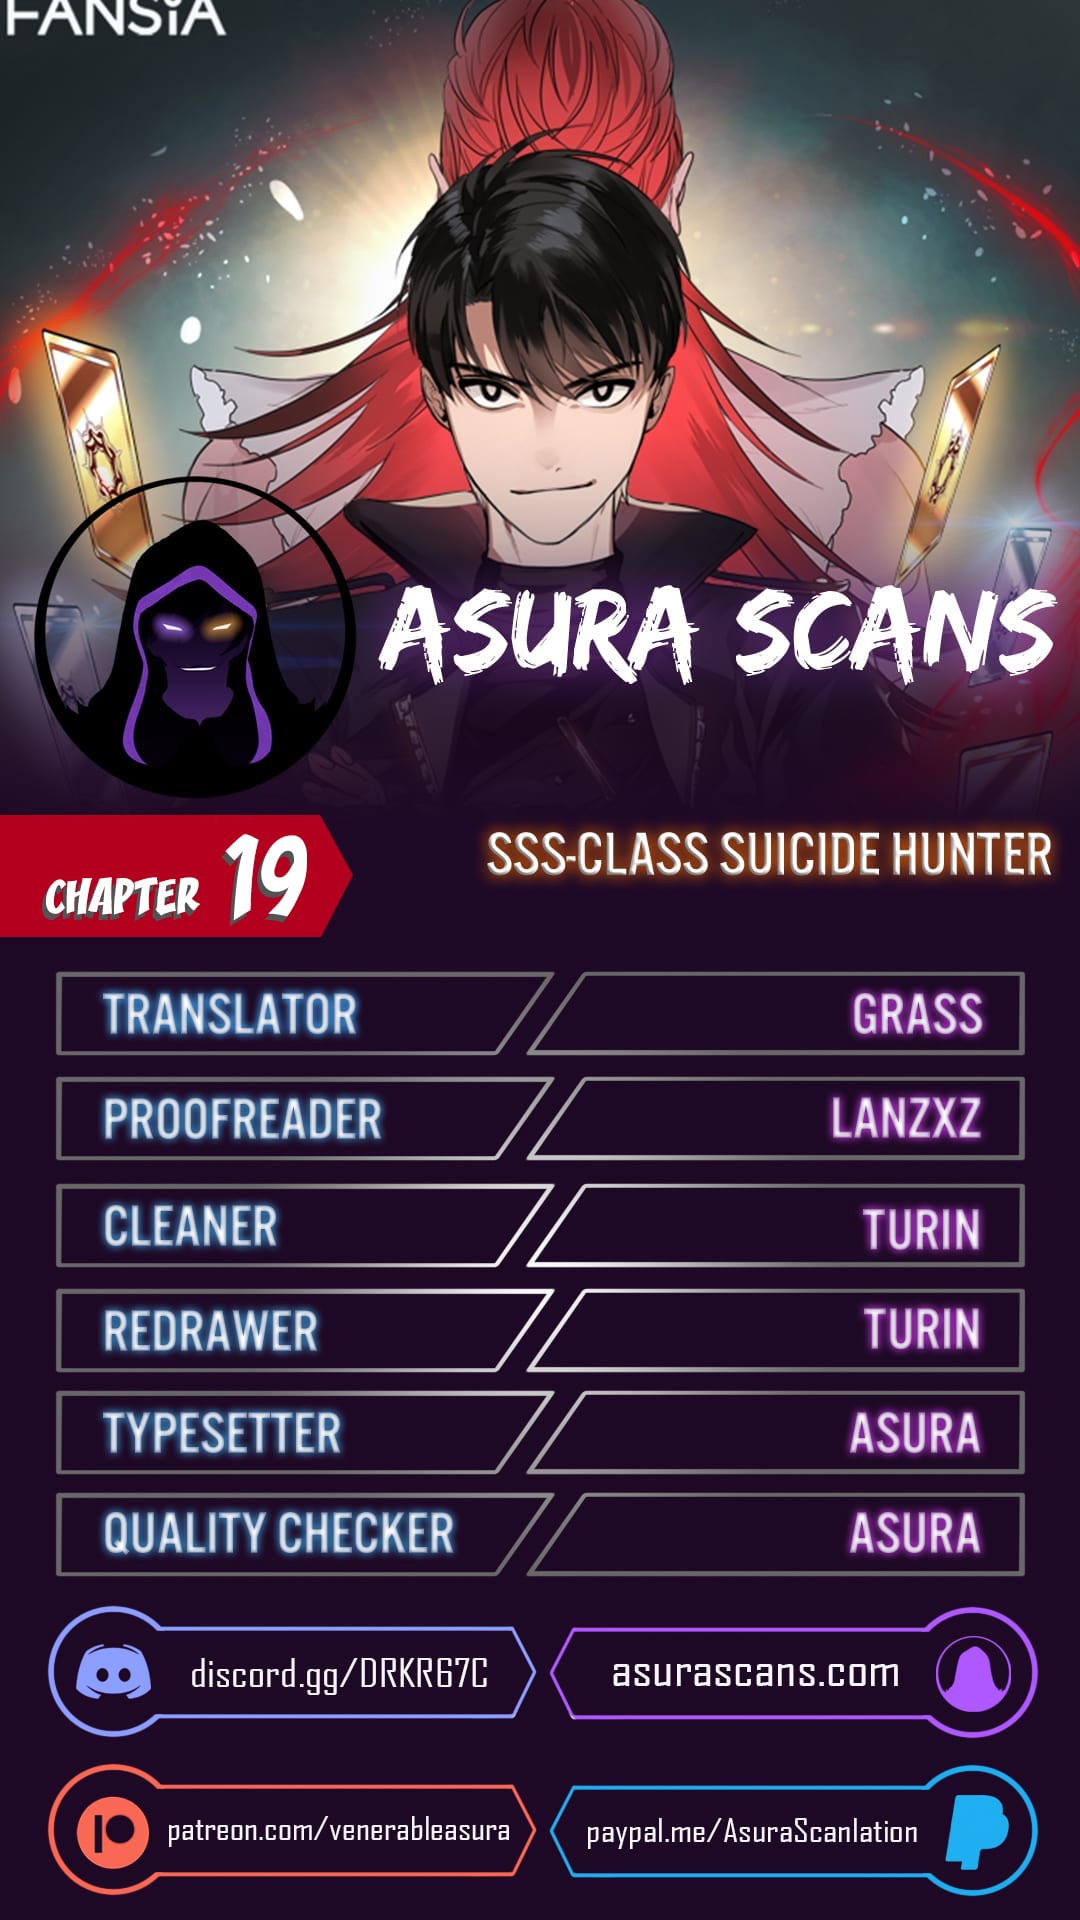 SSS-Class Suicide Hunter chapter 19